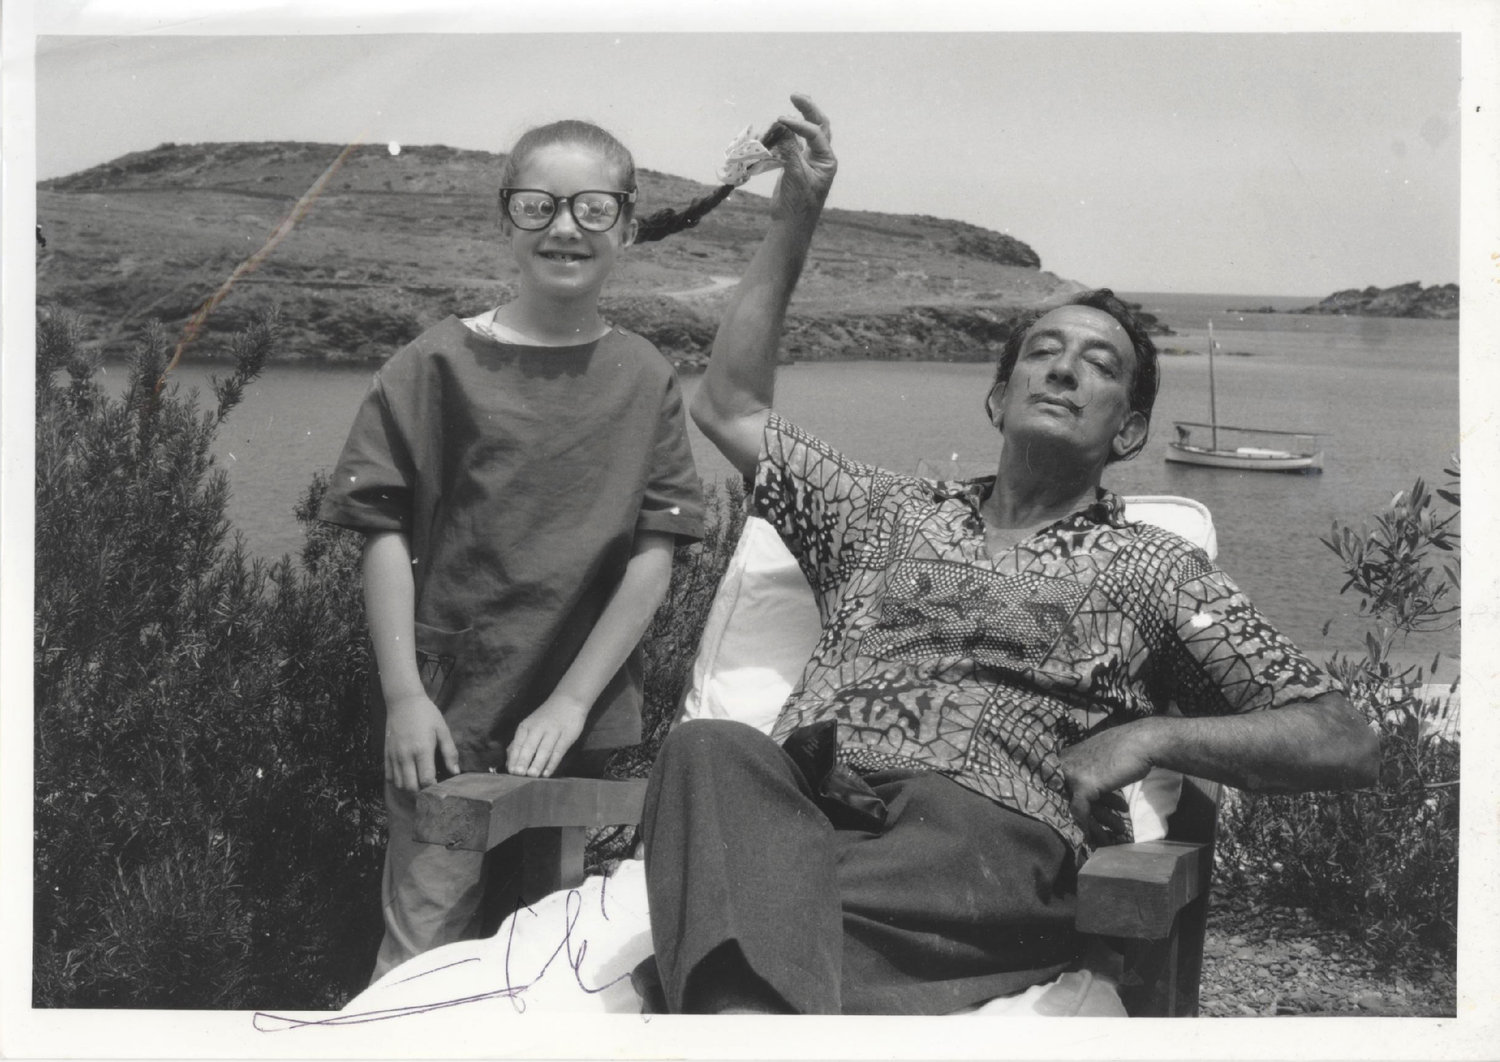 Salvador Dali and a very young Christine Argillet appear in this whimsical family photo.